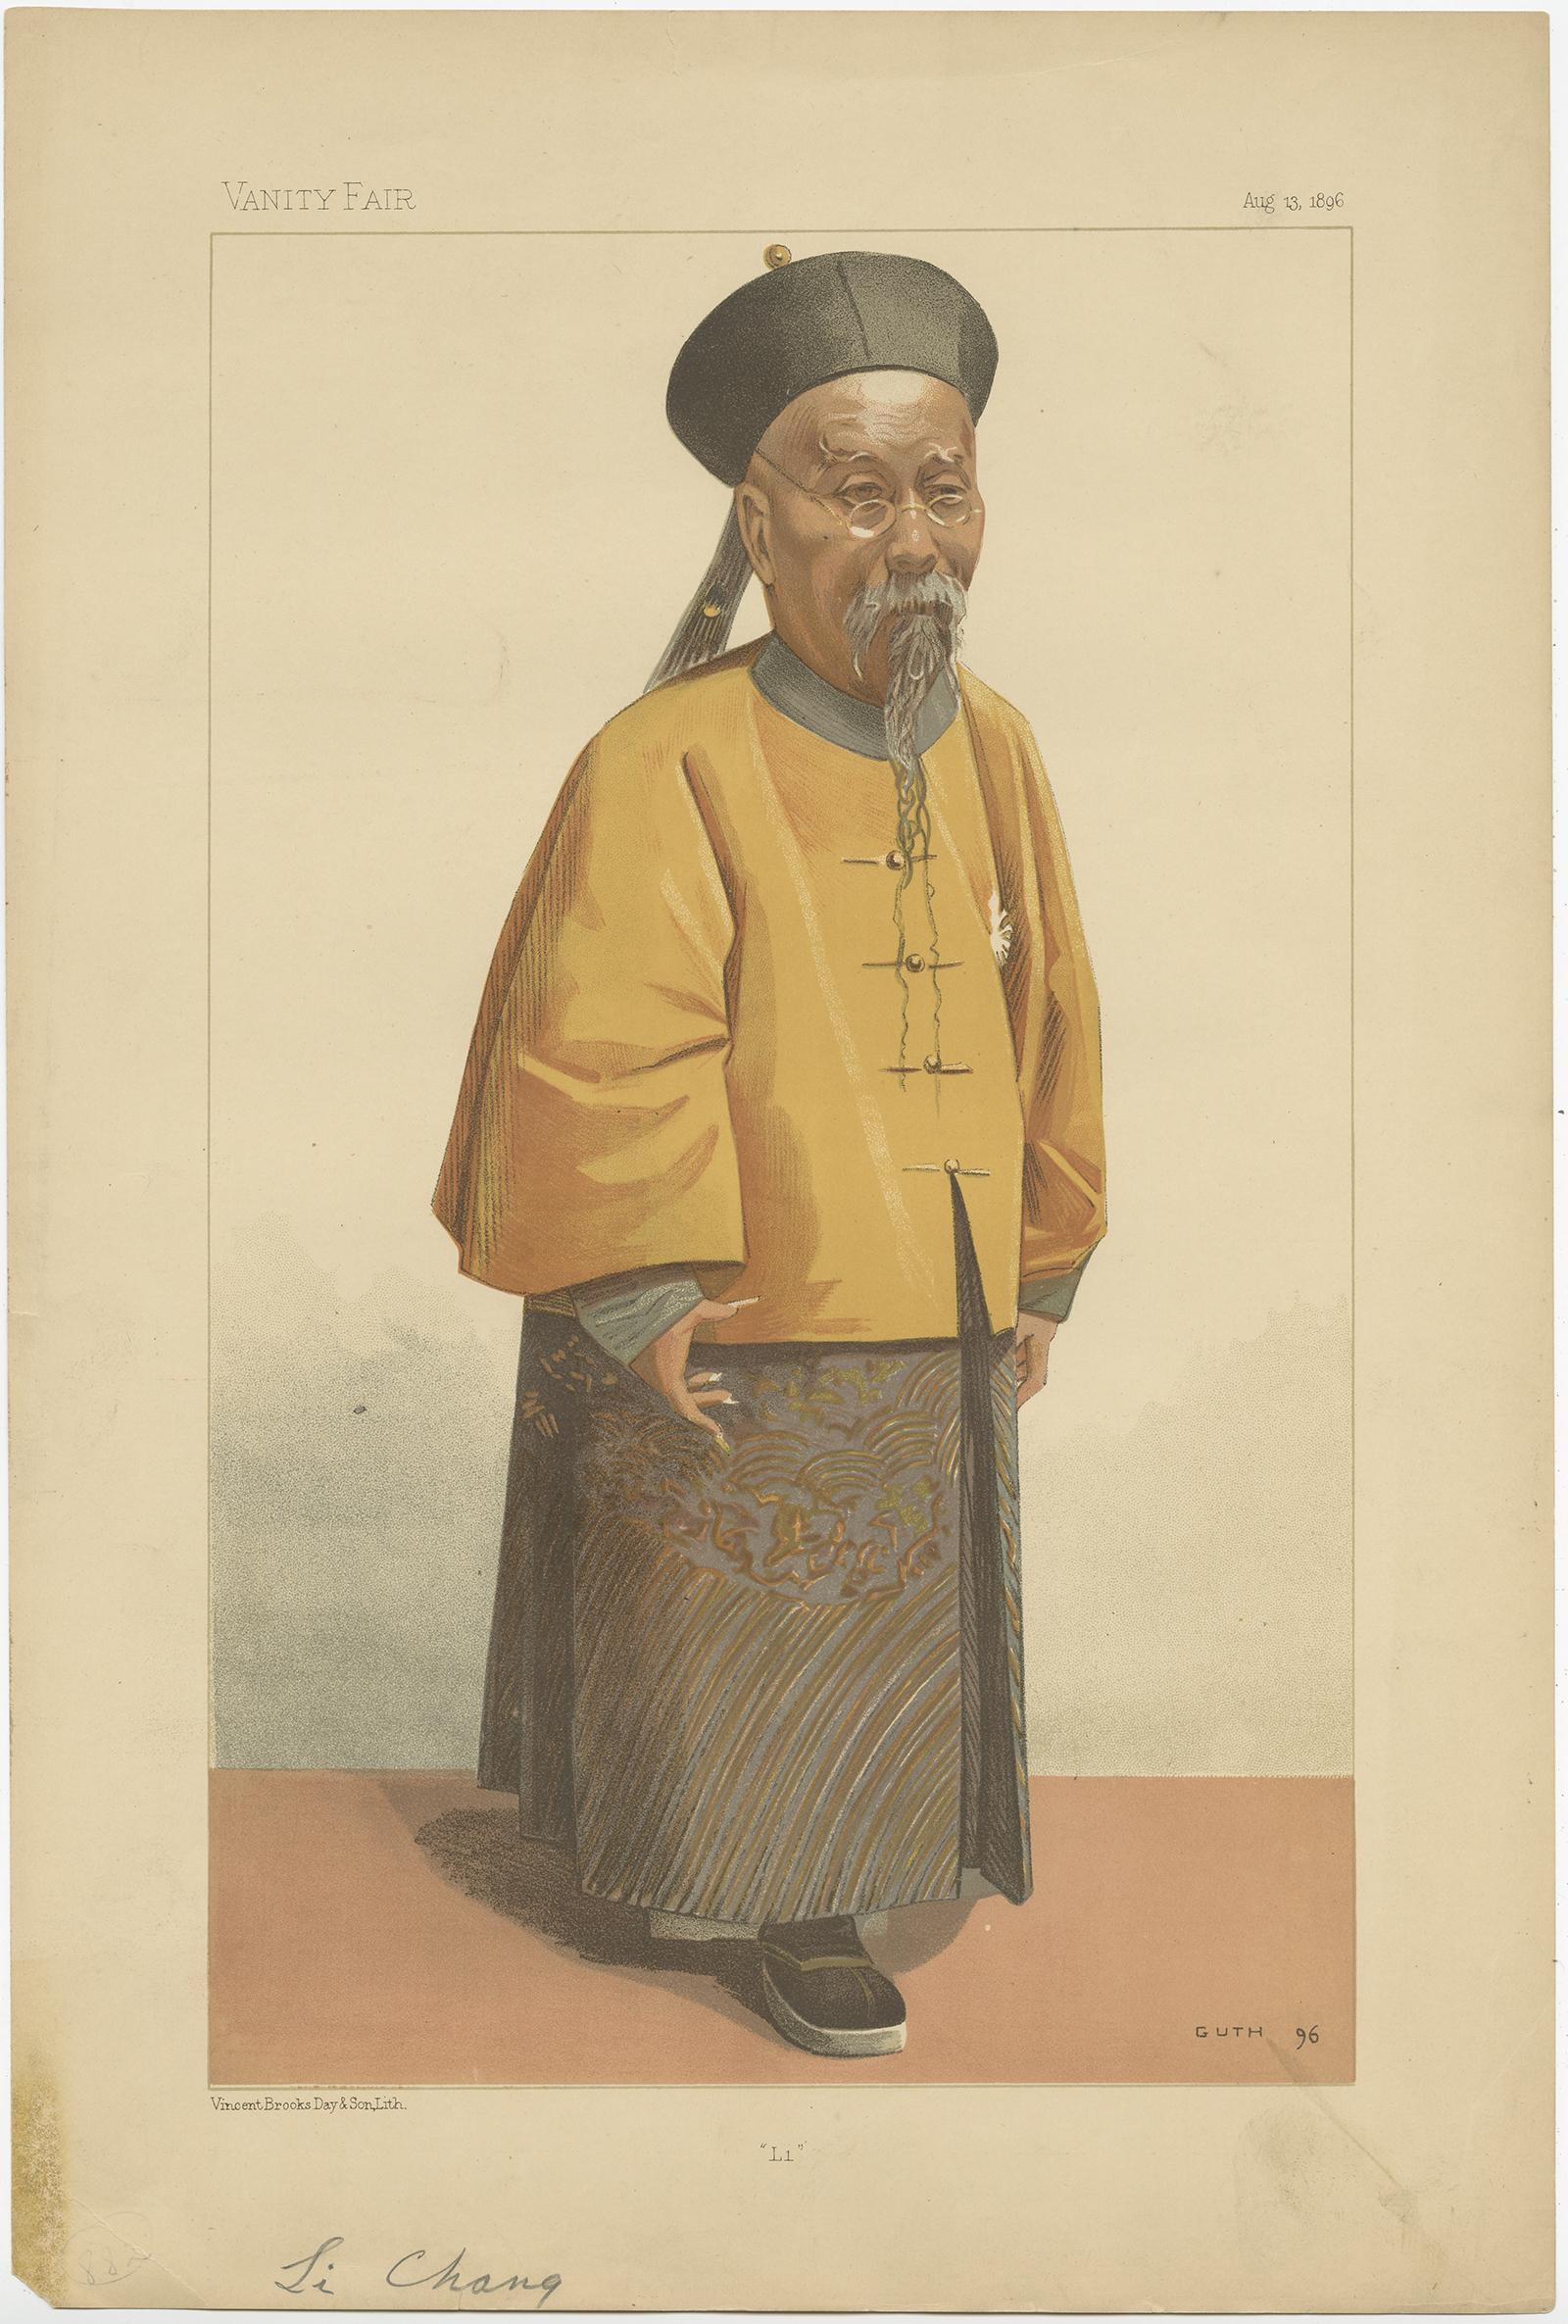 19th Century Antique Print of Li Hung Chang published in the Vanity Fair, 1896 For Sale